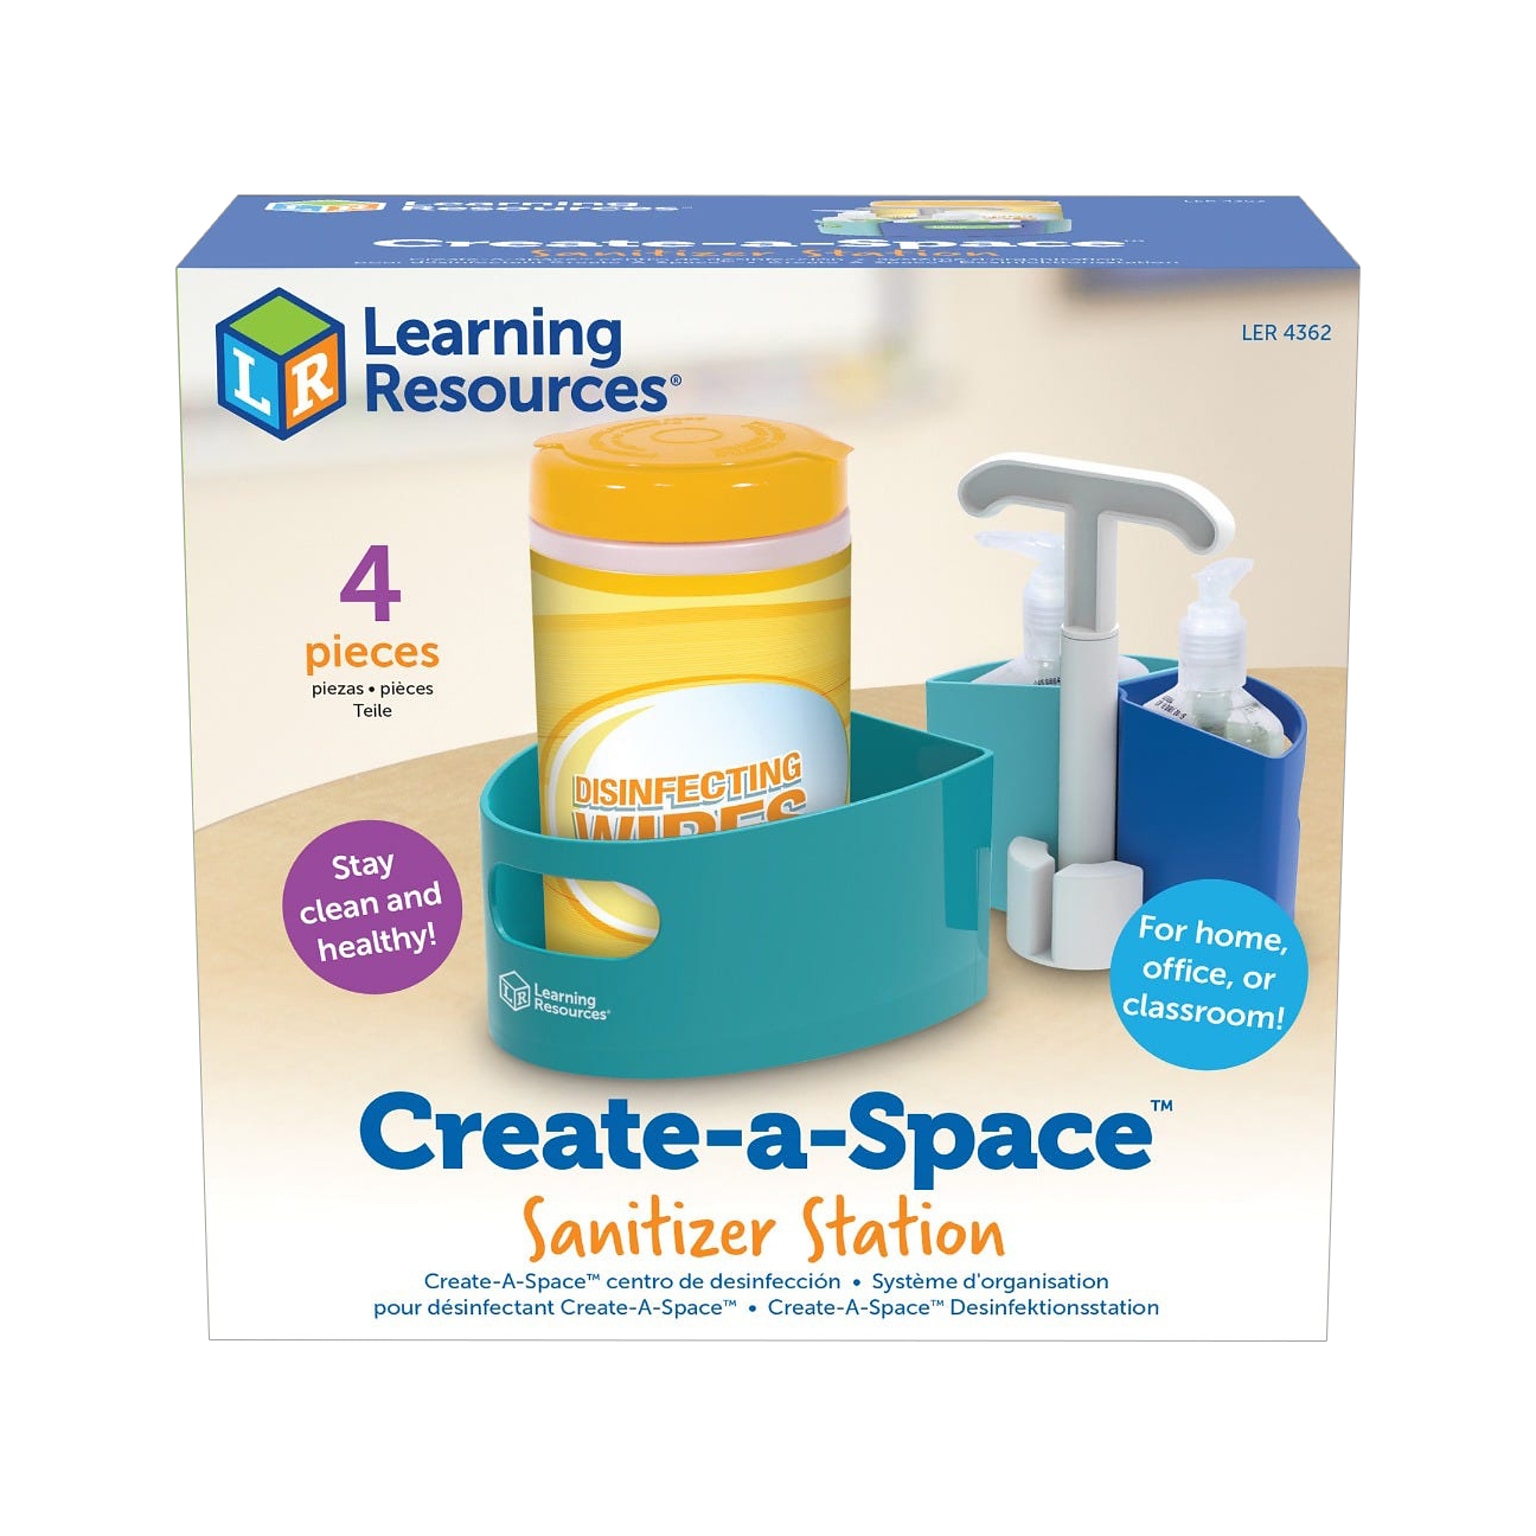 Learning Resources Create-A-Space 3.7 x 5.85 Plastic Sanitizer Station, Turquoise/Blue/White (LER4362)